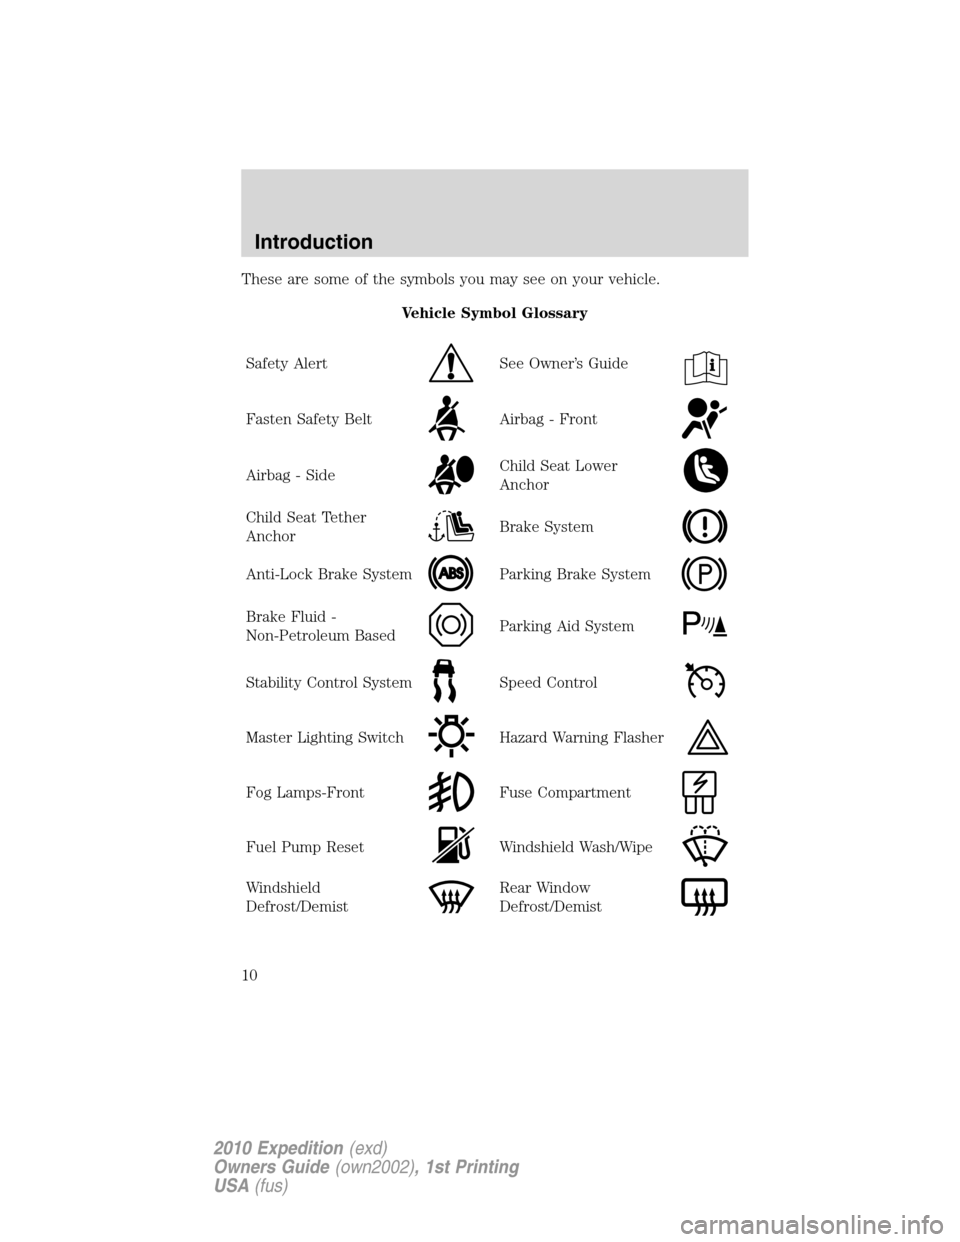 FORD EXPEDITION 2010 3.G Owners Manual These are some of the symbols you may see on your vehicle.
Vehicle Symbol Glossary
Safety Alert
See Owner’s Guide
Fasten Safety BeltAirbag - Front
Airbag - SideChild Seat Lower
Anchor
Child Seat Tet